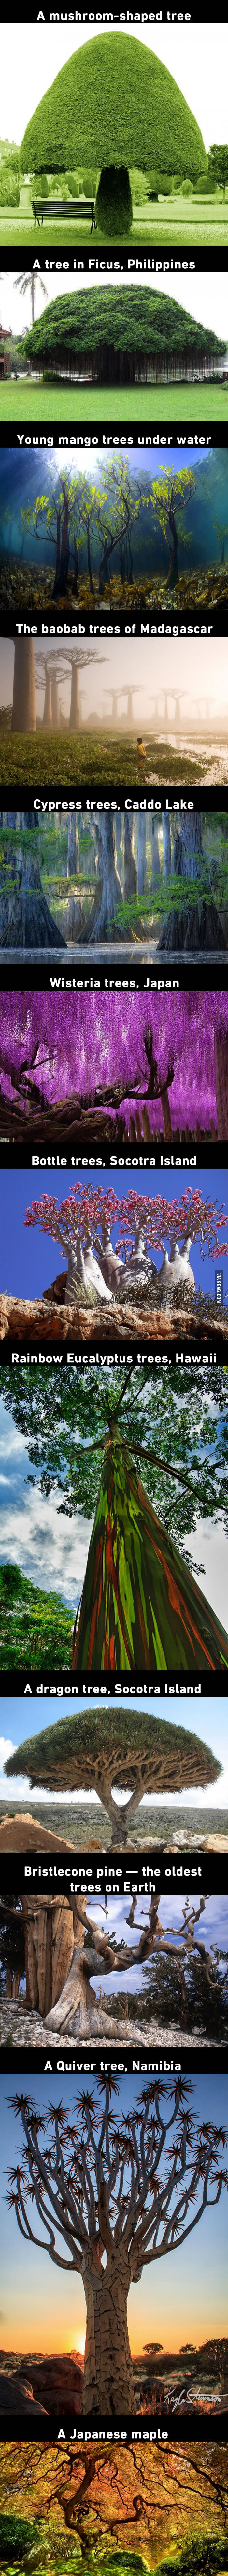 12 Beautiful Trees That You'd Thought They Grow On Pandora From Avatar